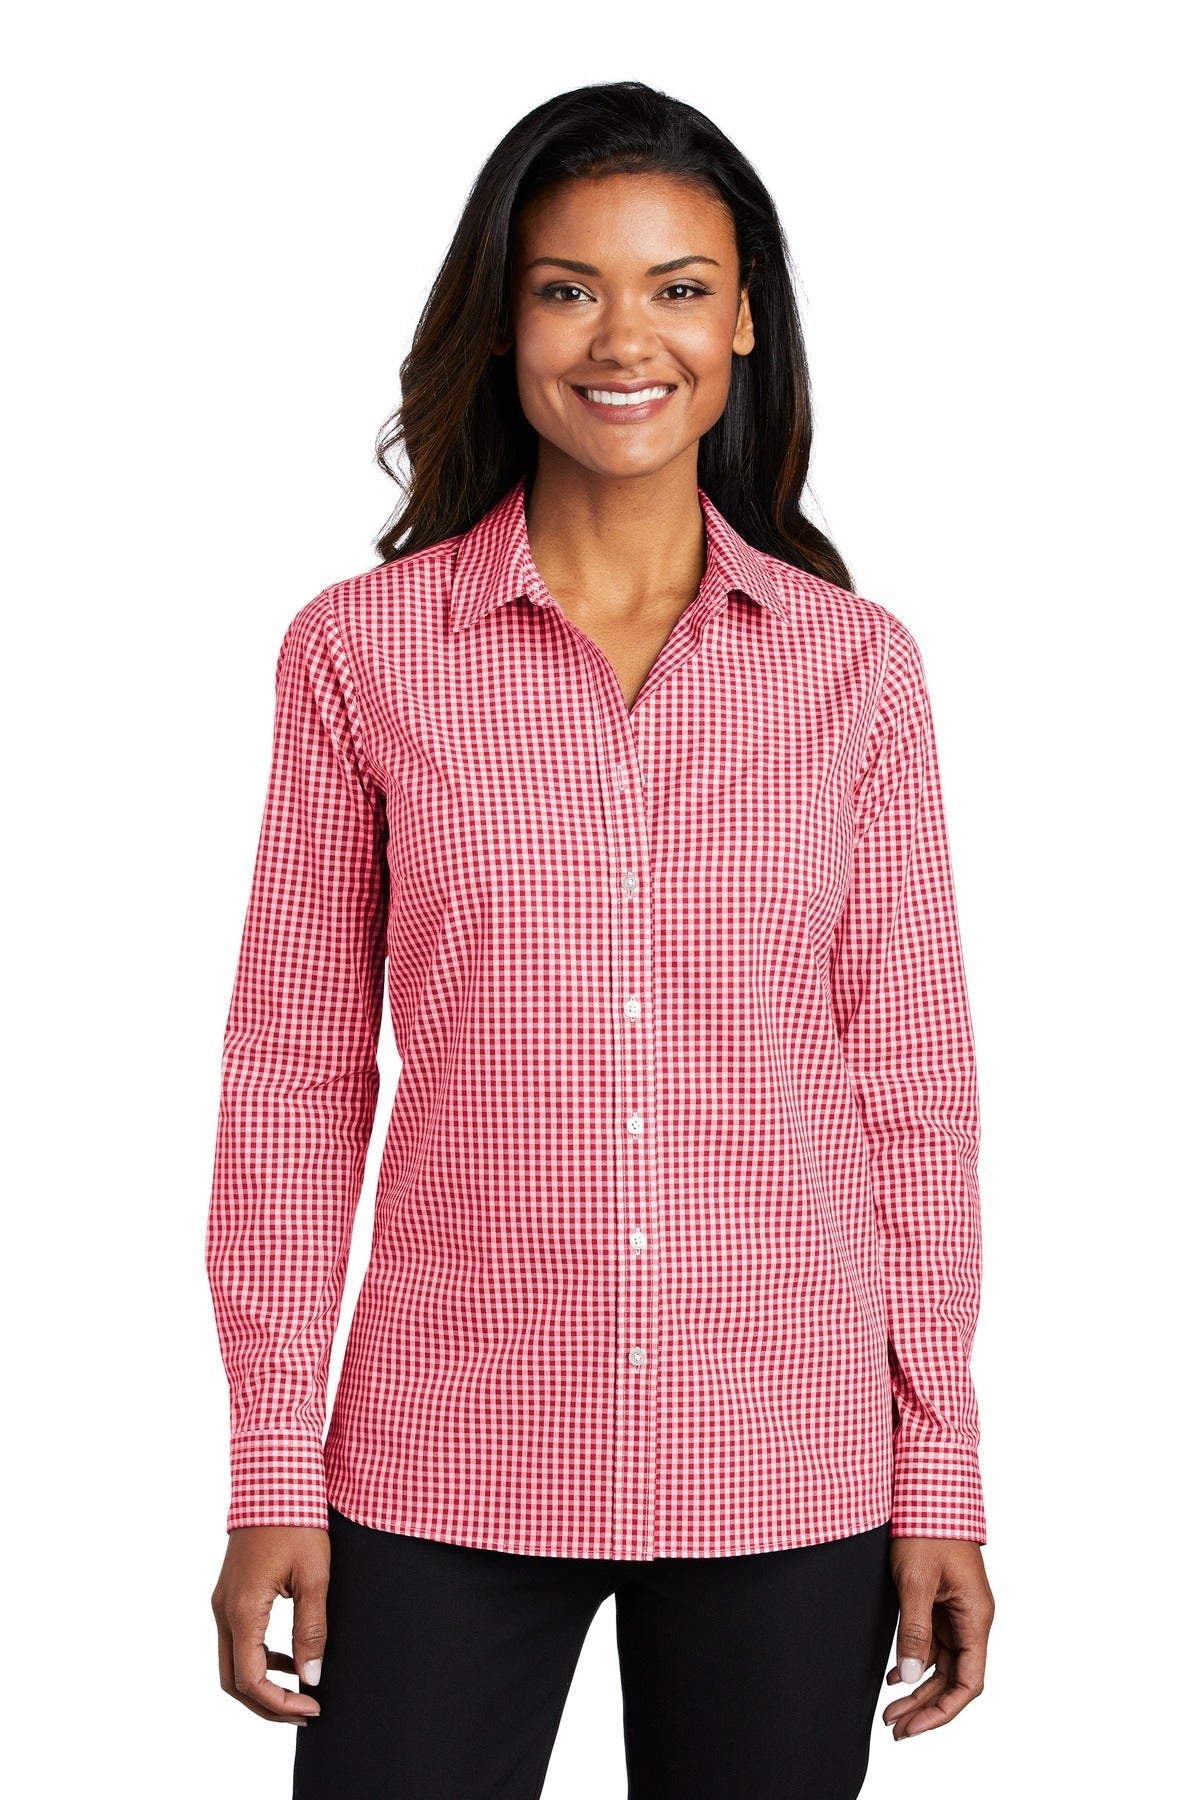 Port Authority ® Ladies Broadcloth Gingham Easy Care Shirt LW644 - DFW Impression